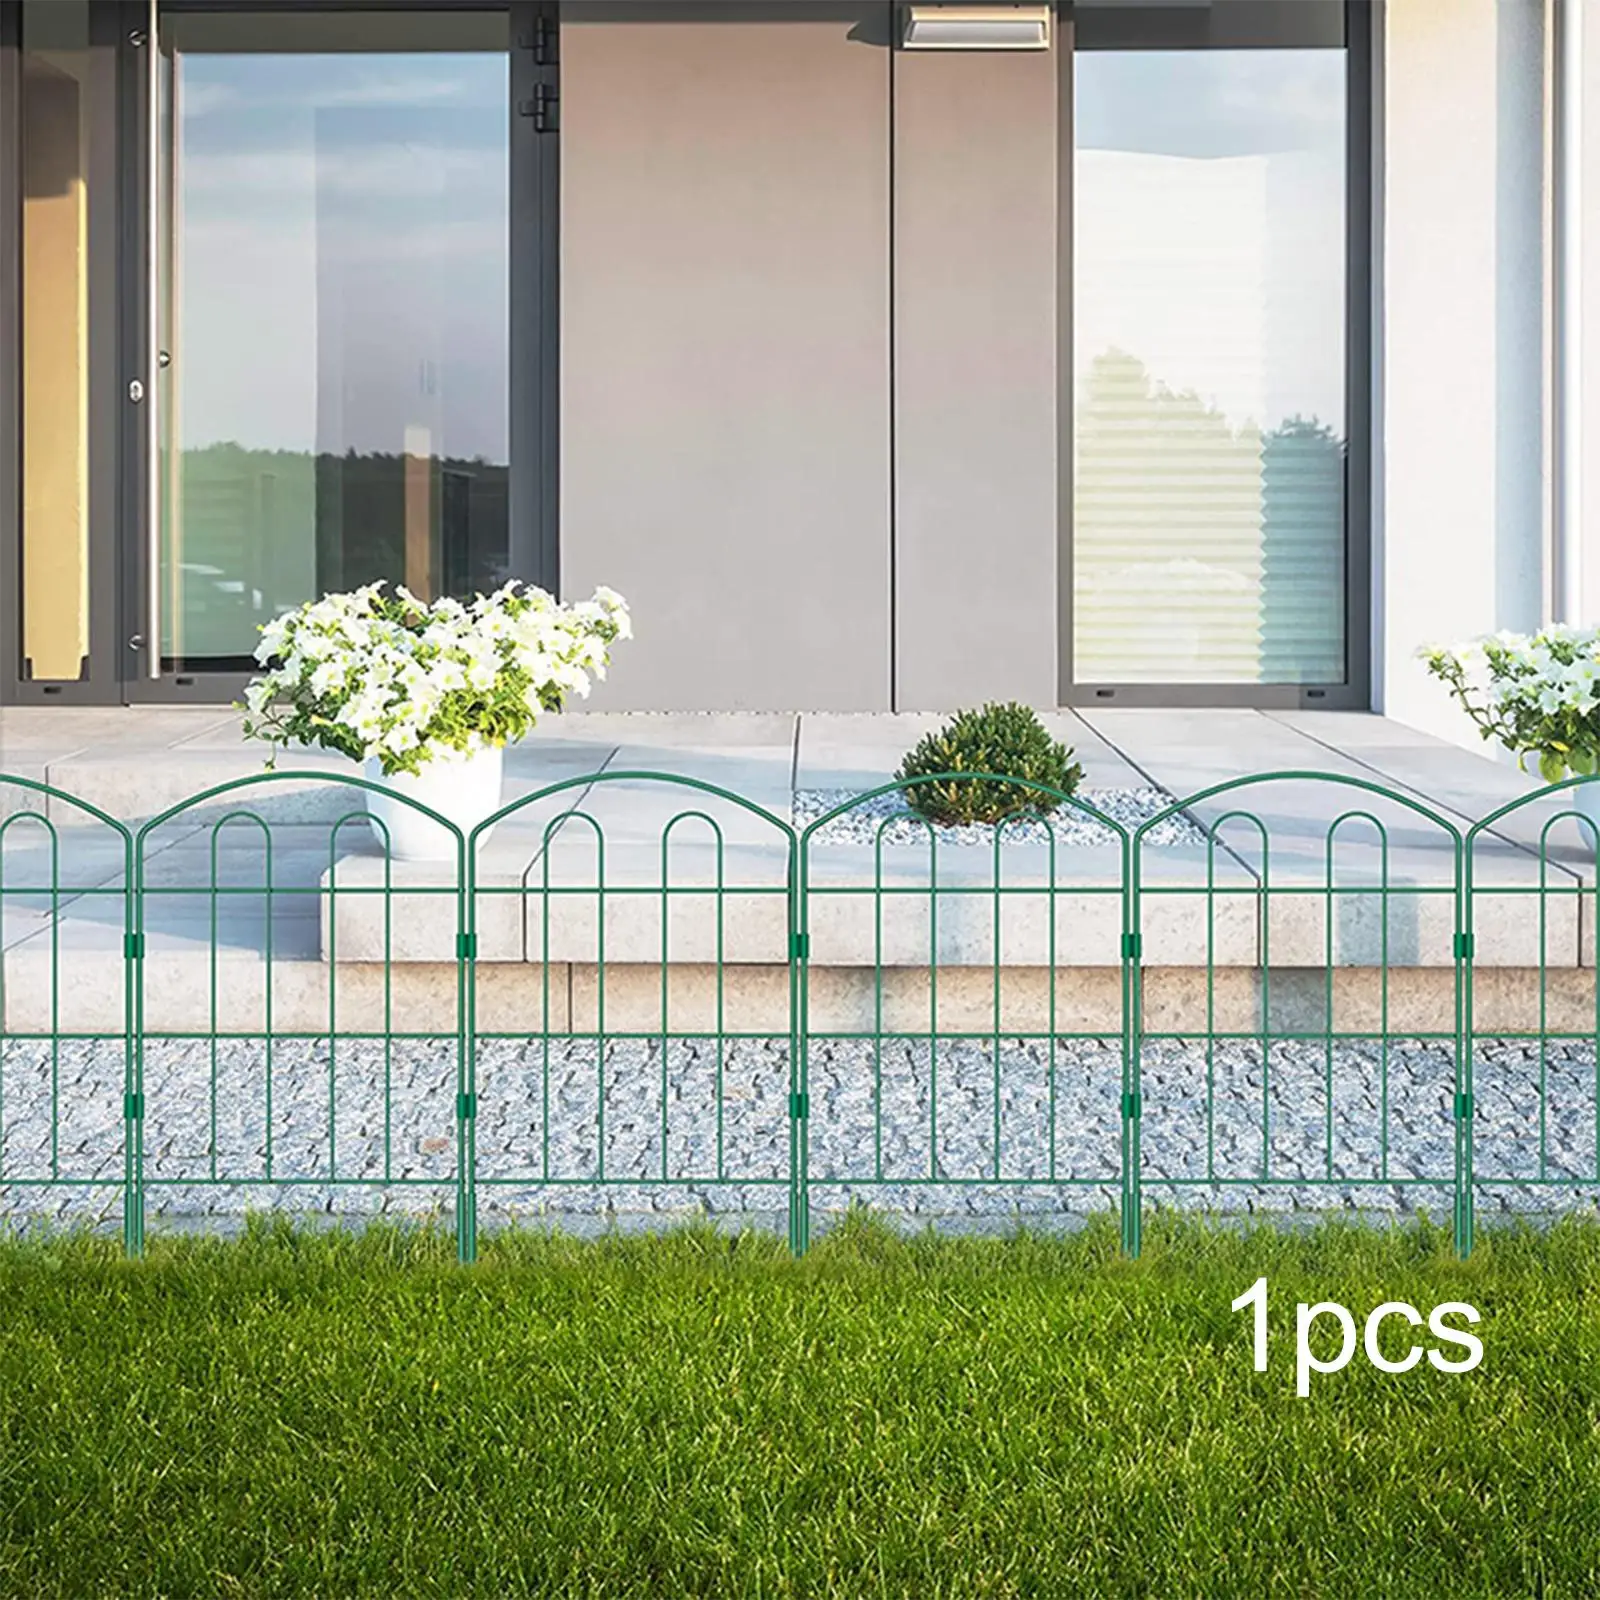 Decorative Garden Fence Panel Tall for Dogs Landscape Metal Border Edging